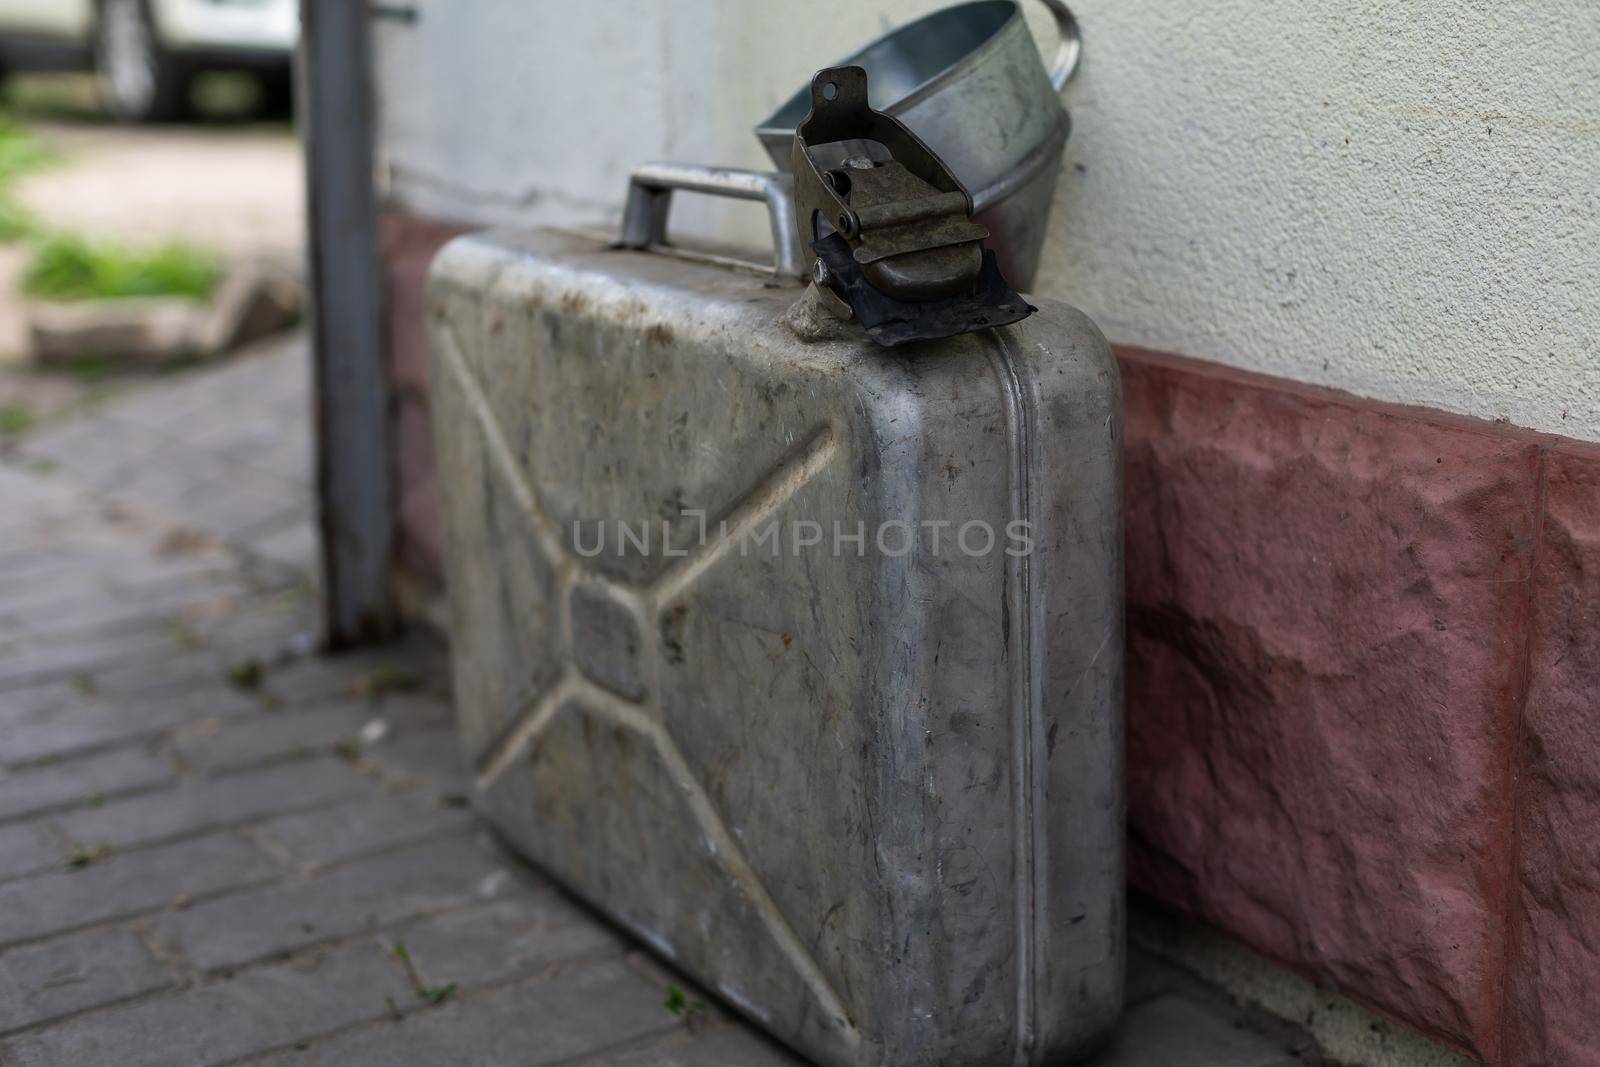 fuel canister and watering can.